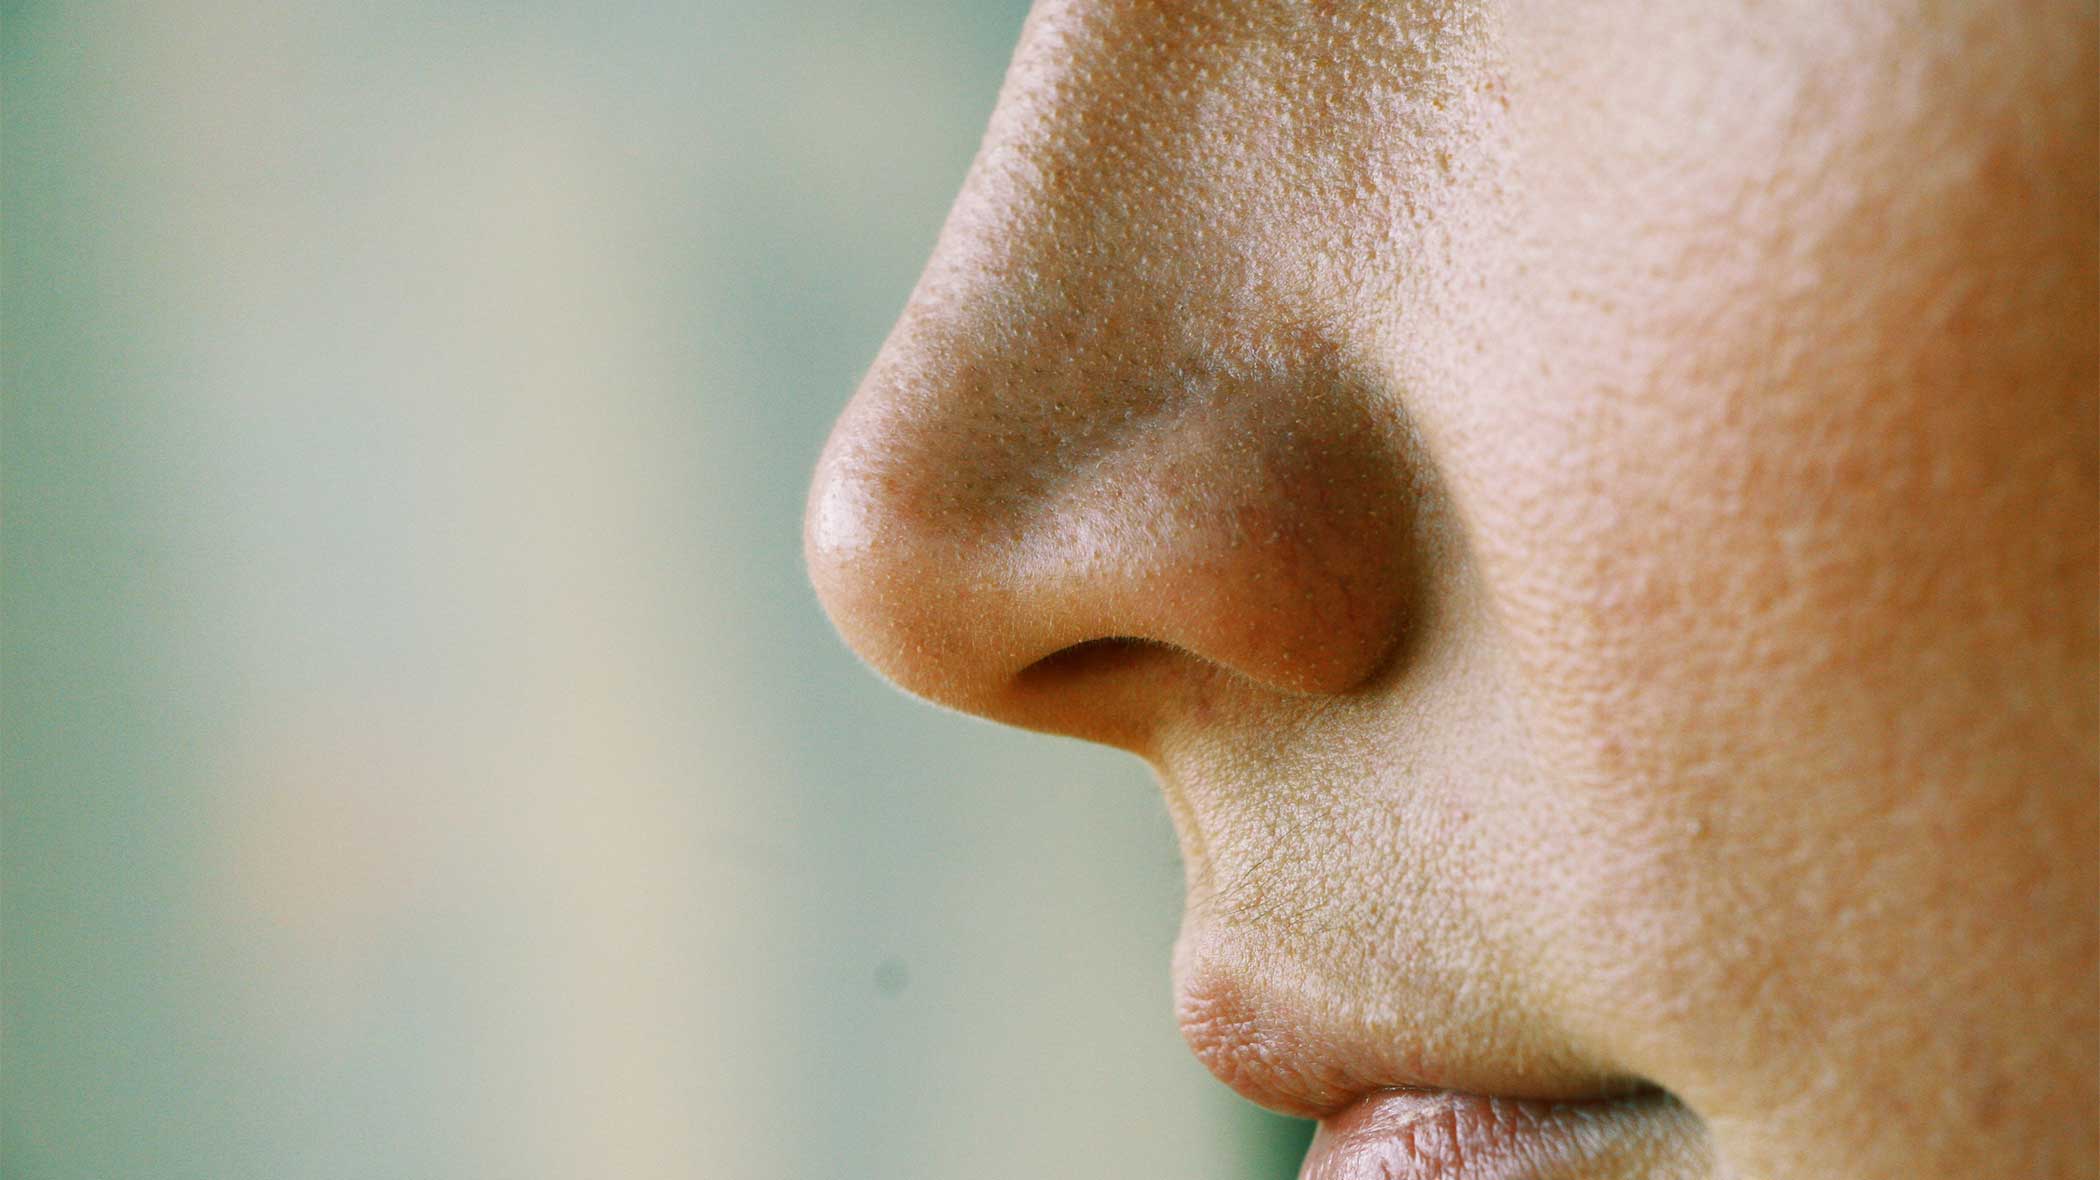 Long-term cocaine use causes a hole in the cartilage between the nostrils